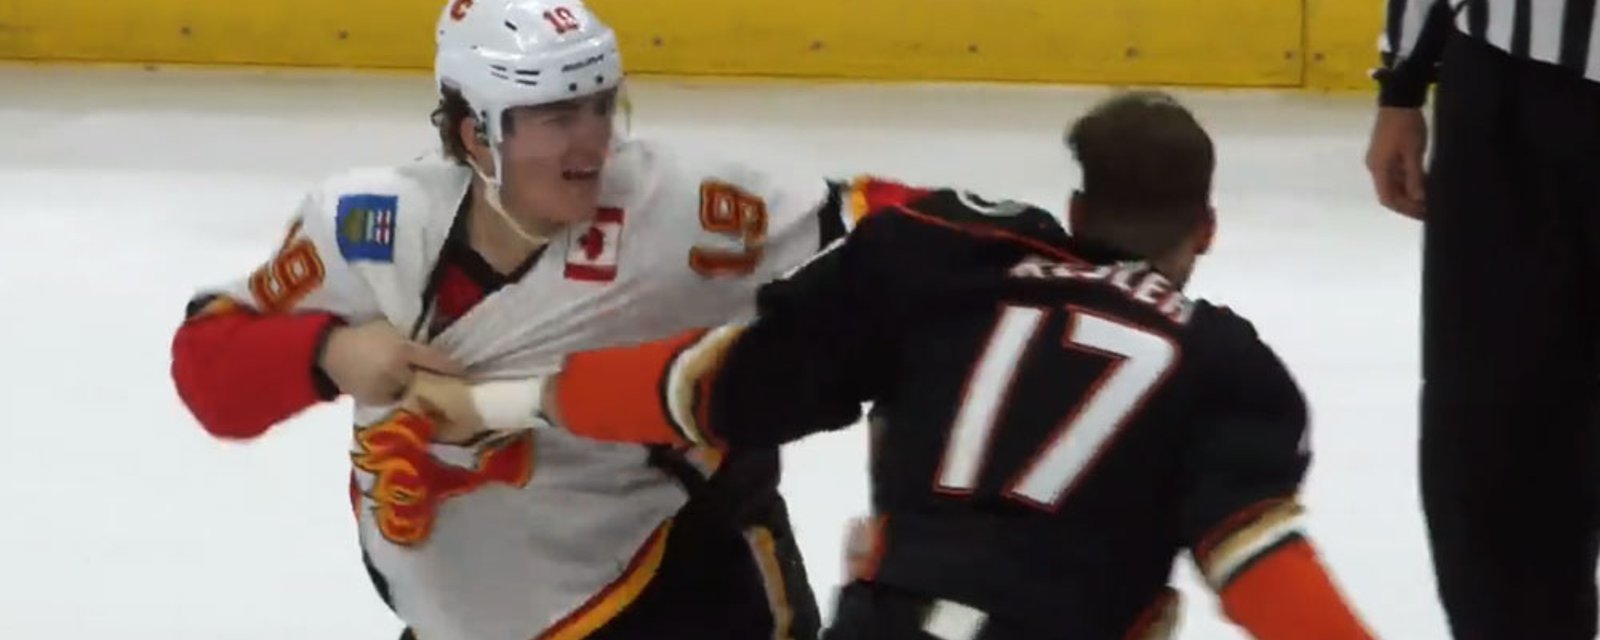 Kesler and Tkachuk drop the gloves in a titanic fight, both throw heavy punches!